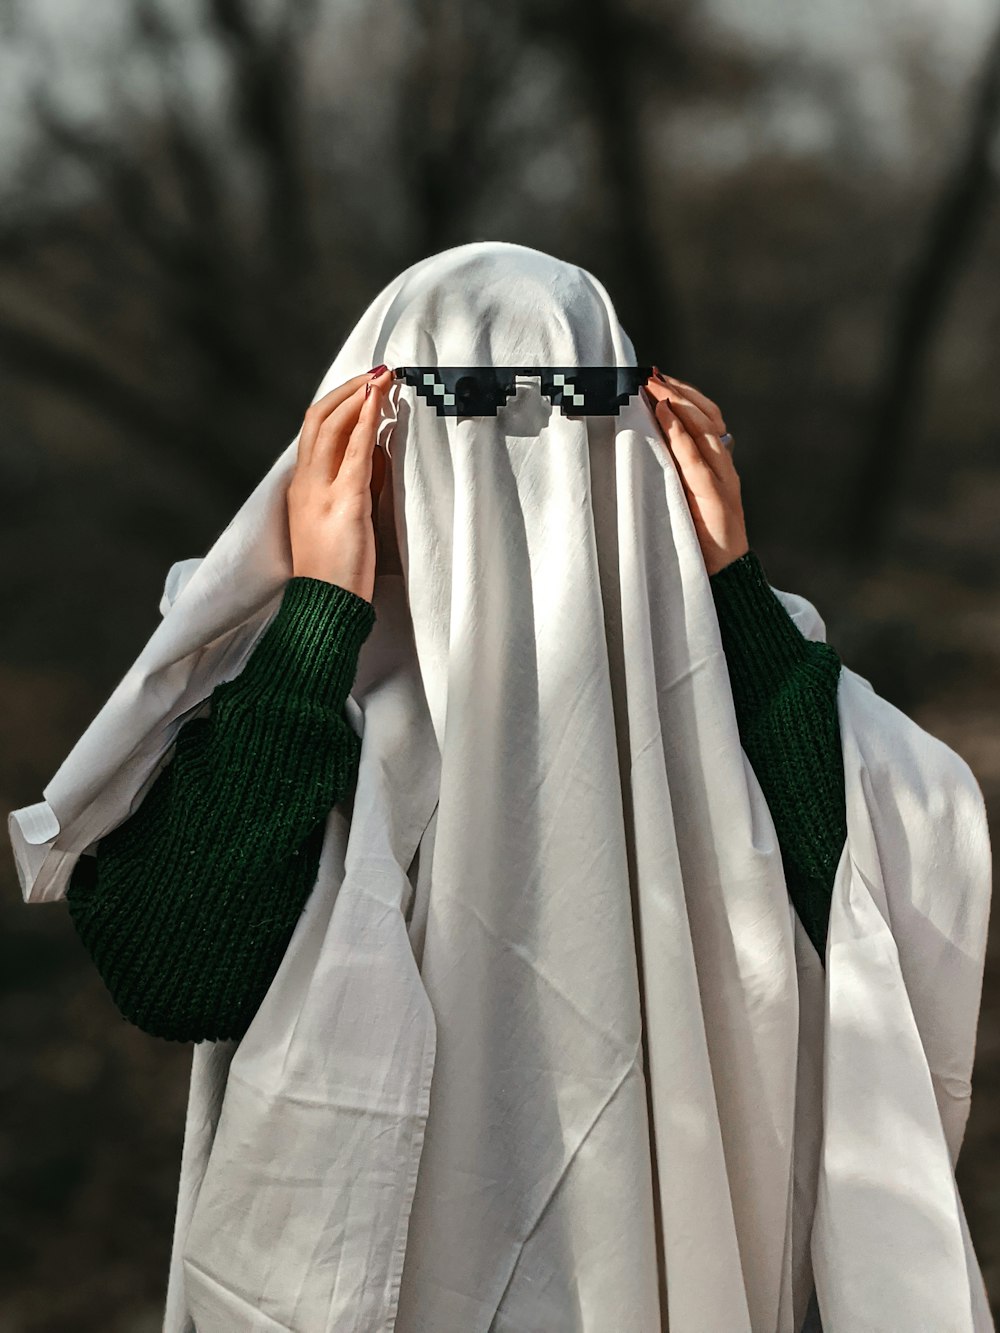 a person covering their face with a white cloth